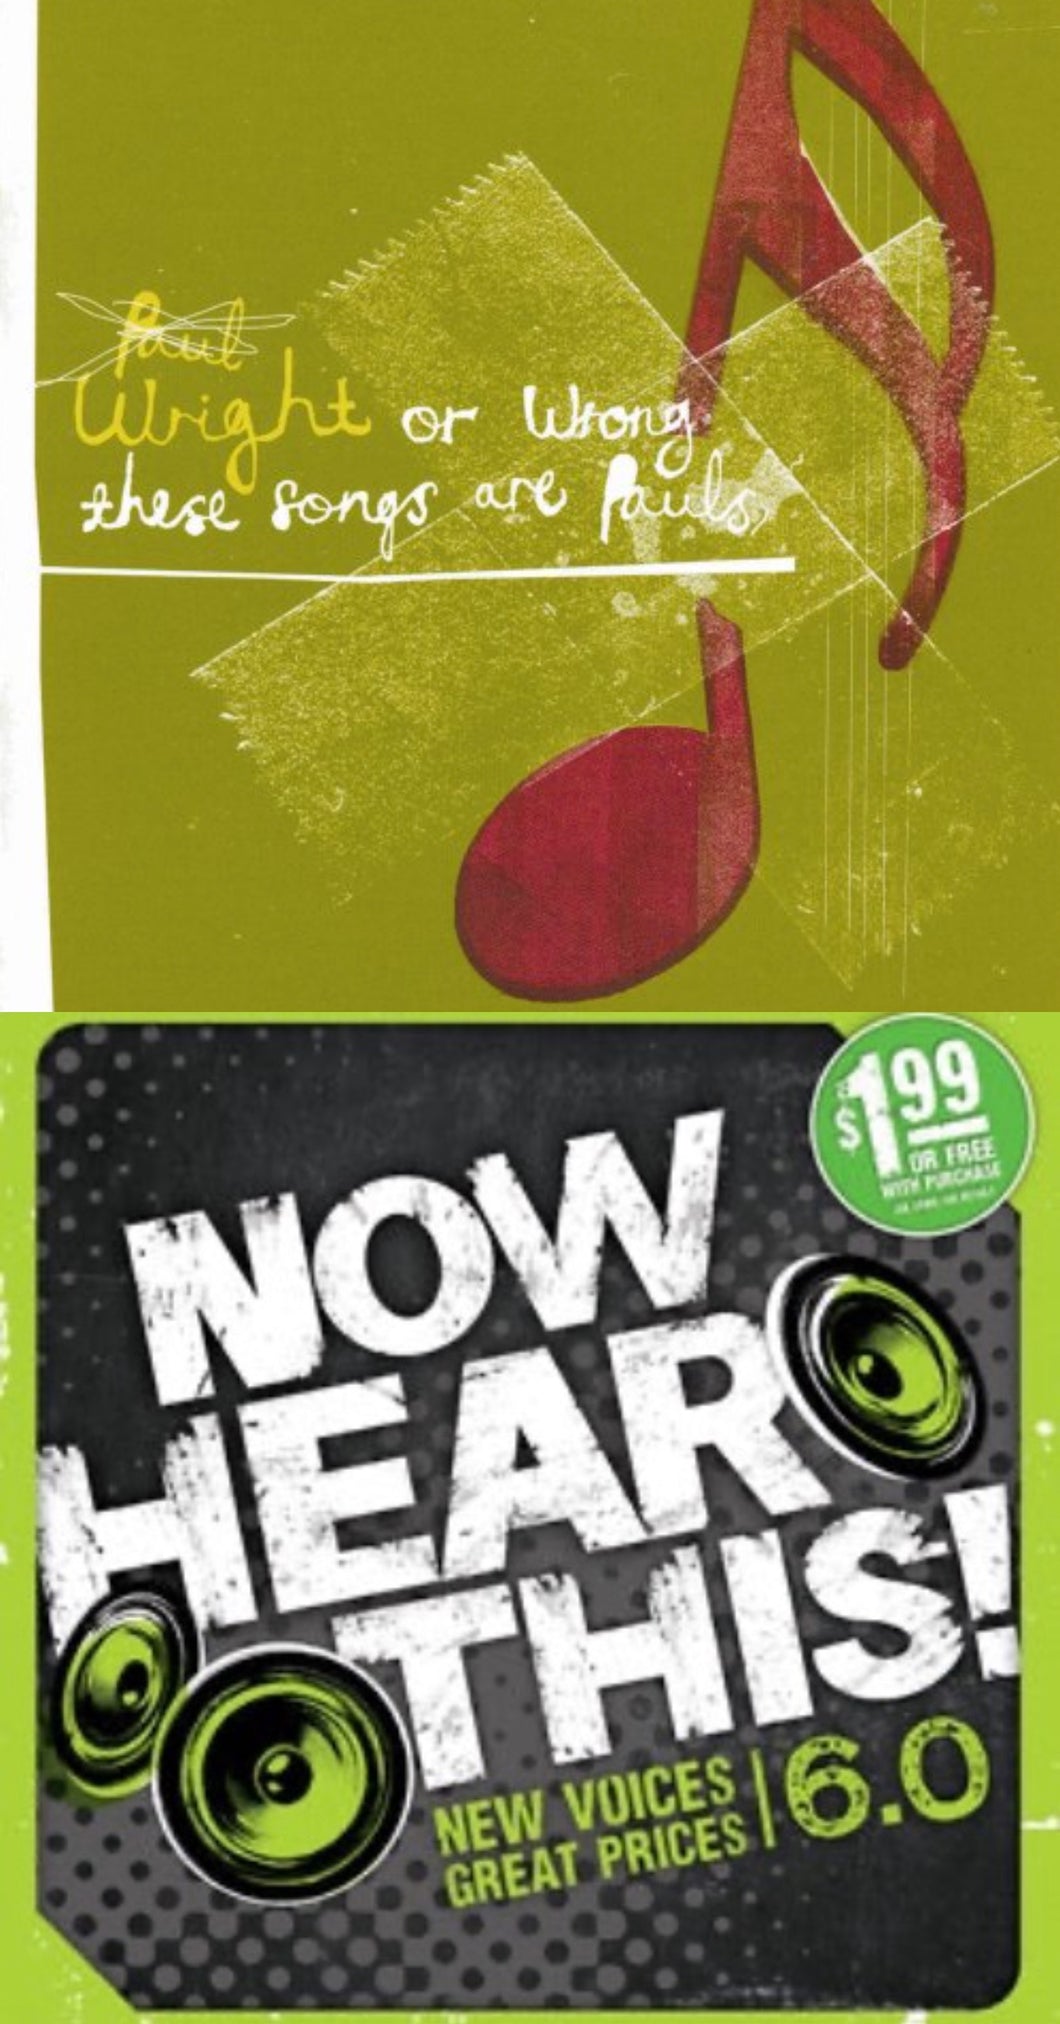 Paul Wright Wright or Wrong + Now Hear This! 6.0 2CD